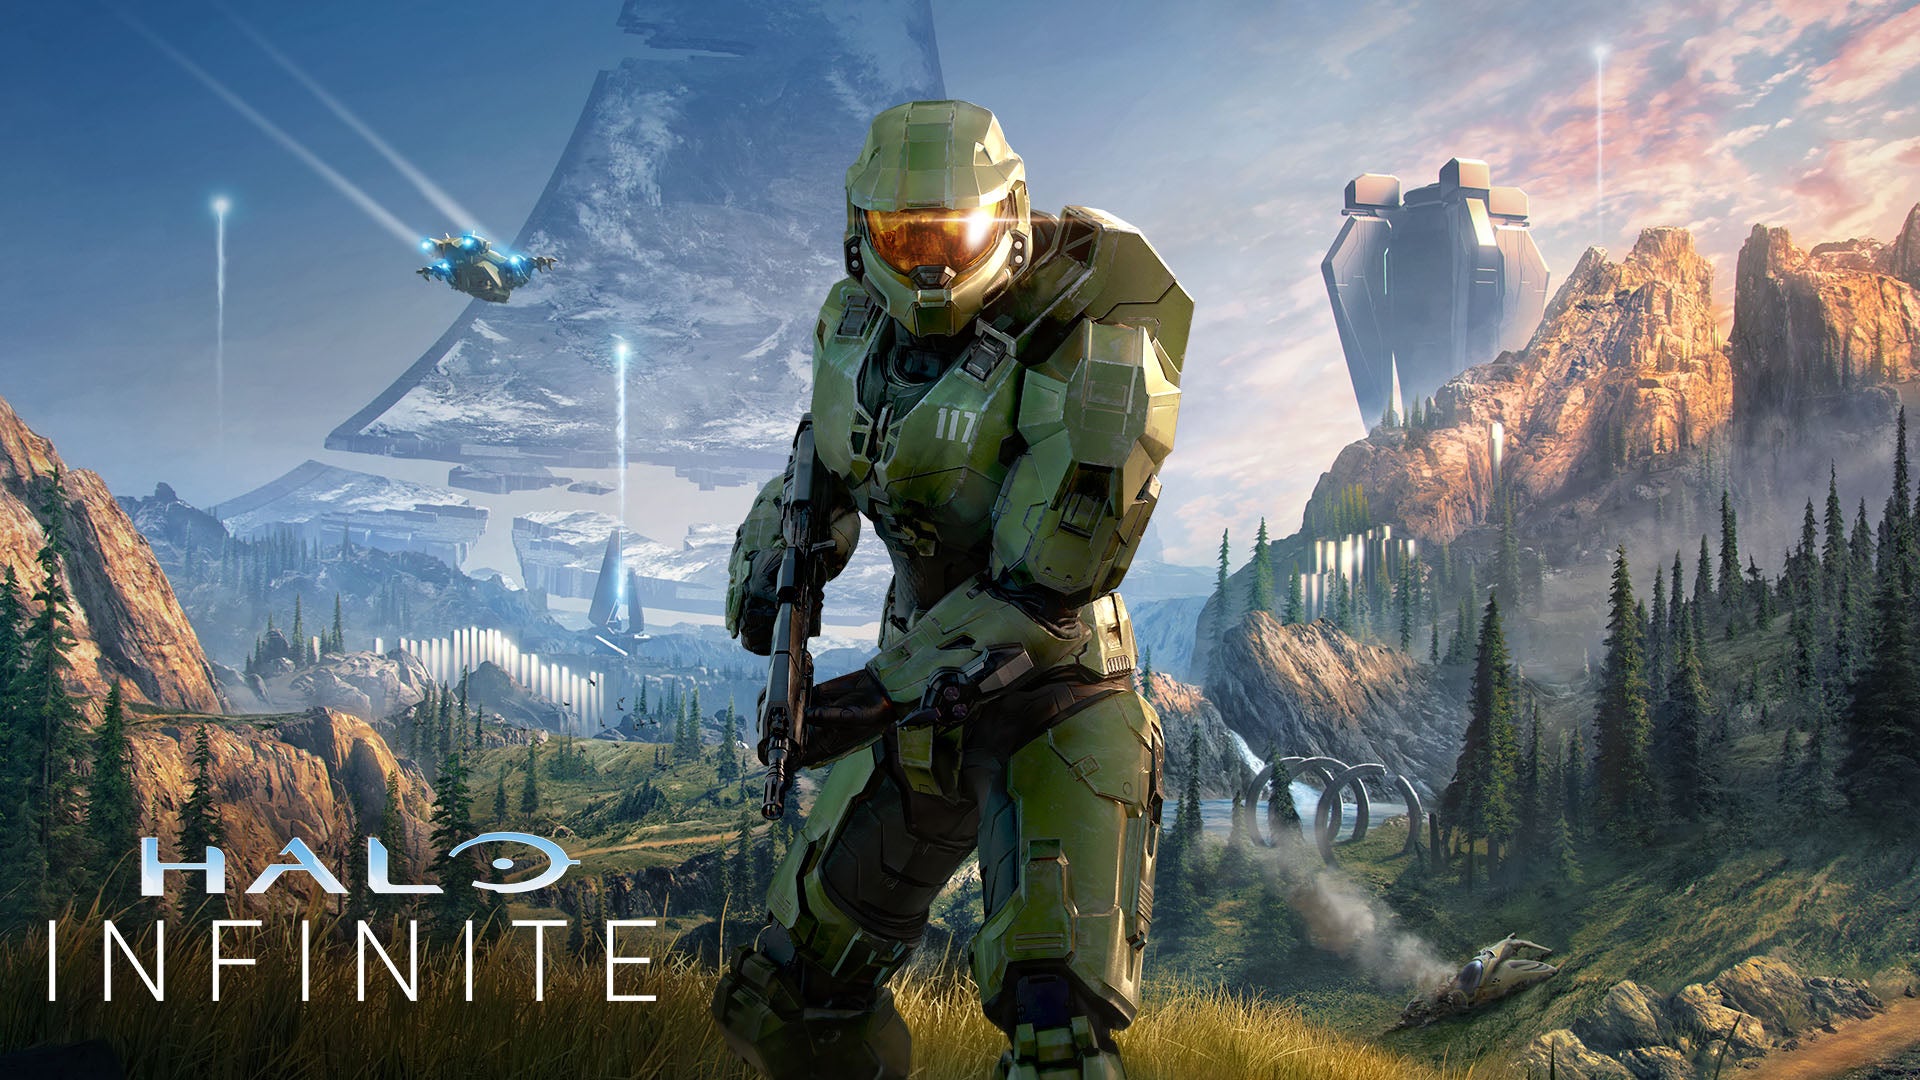 Image for Halo Infinite development troubles caused by heavy outsourcing - report